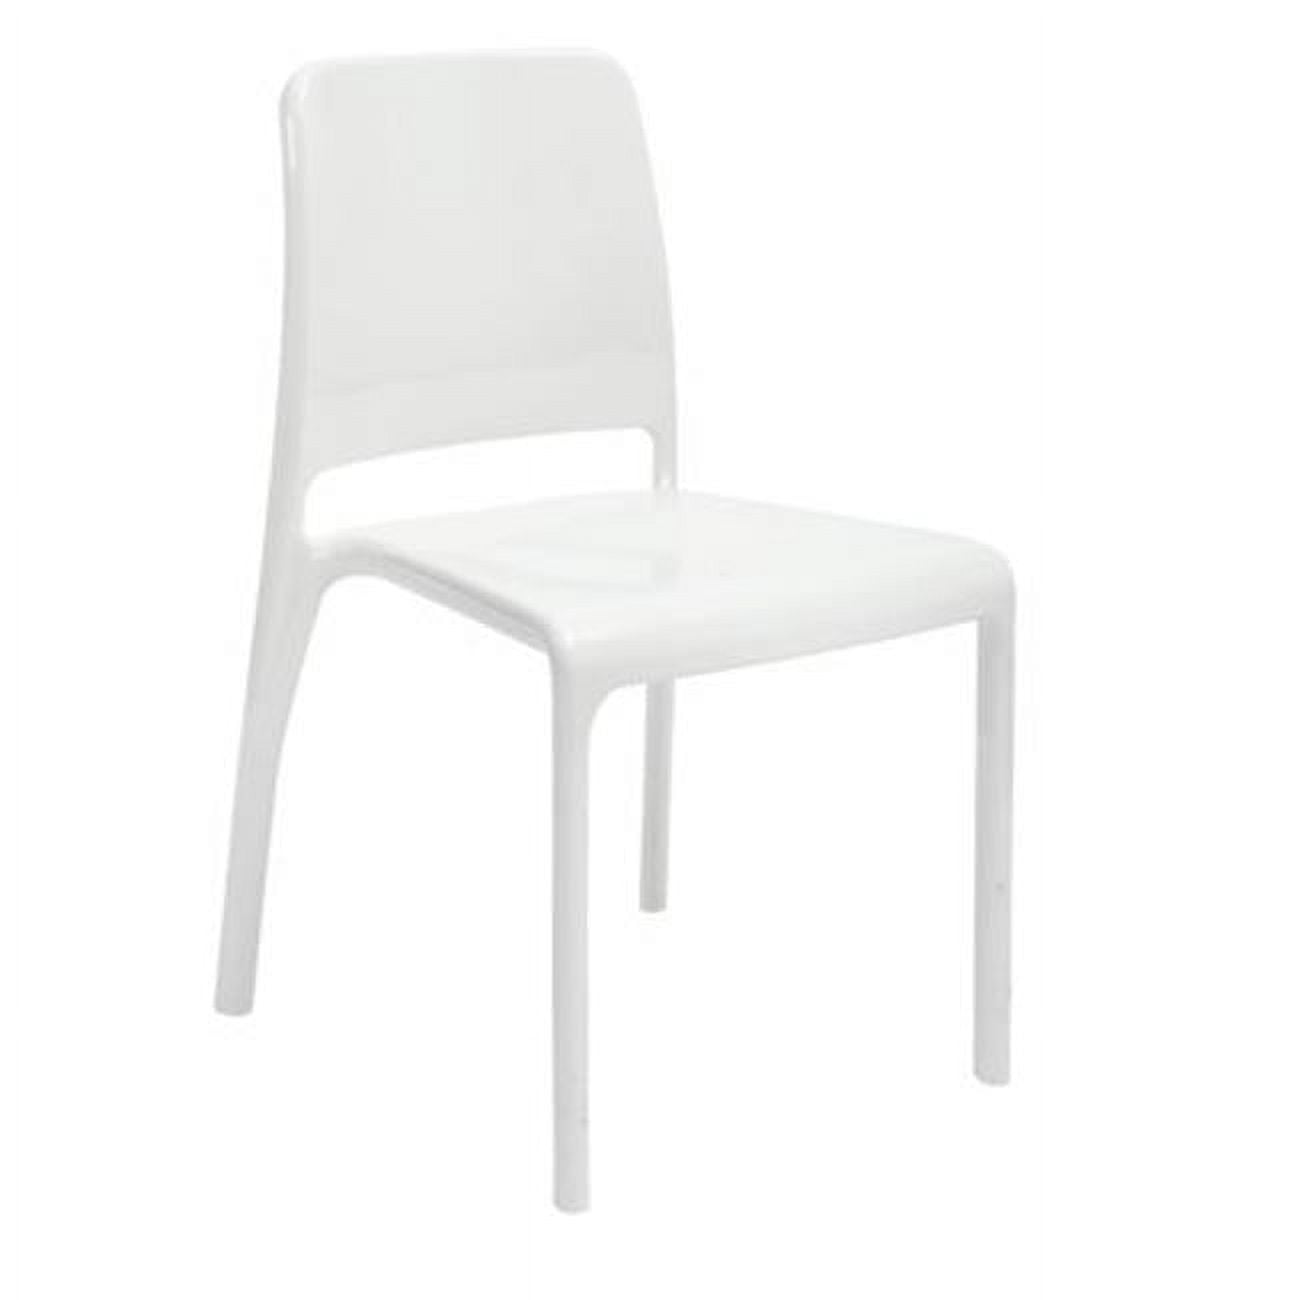 Picture of Alba CHPOSTERBC Poster Reception Chair, White - Set of 4